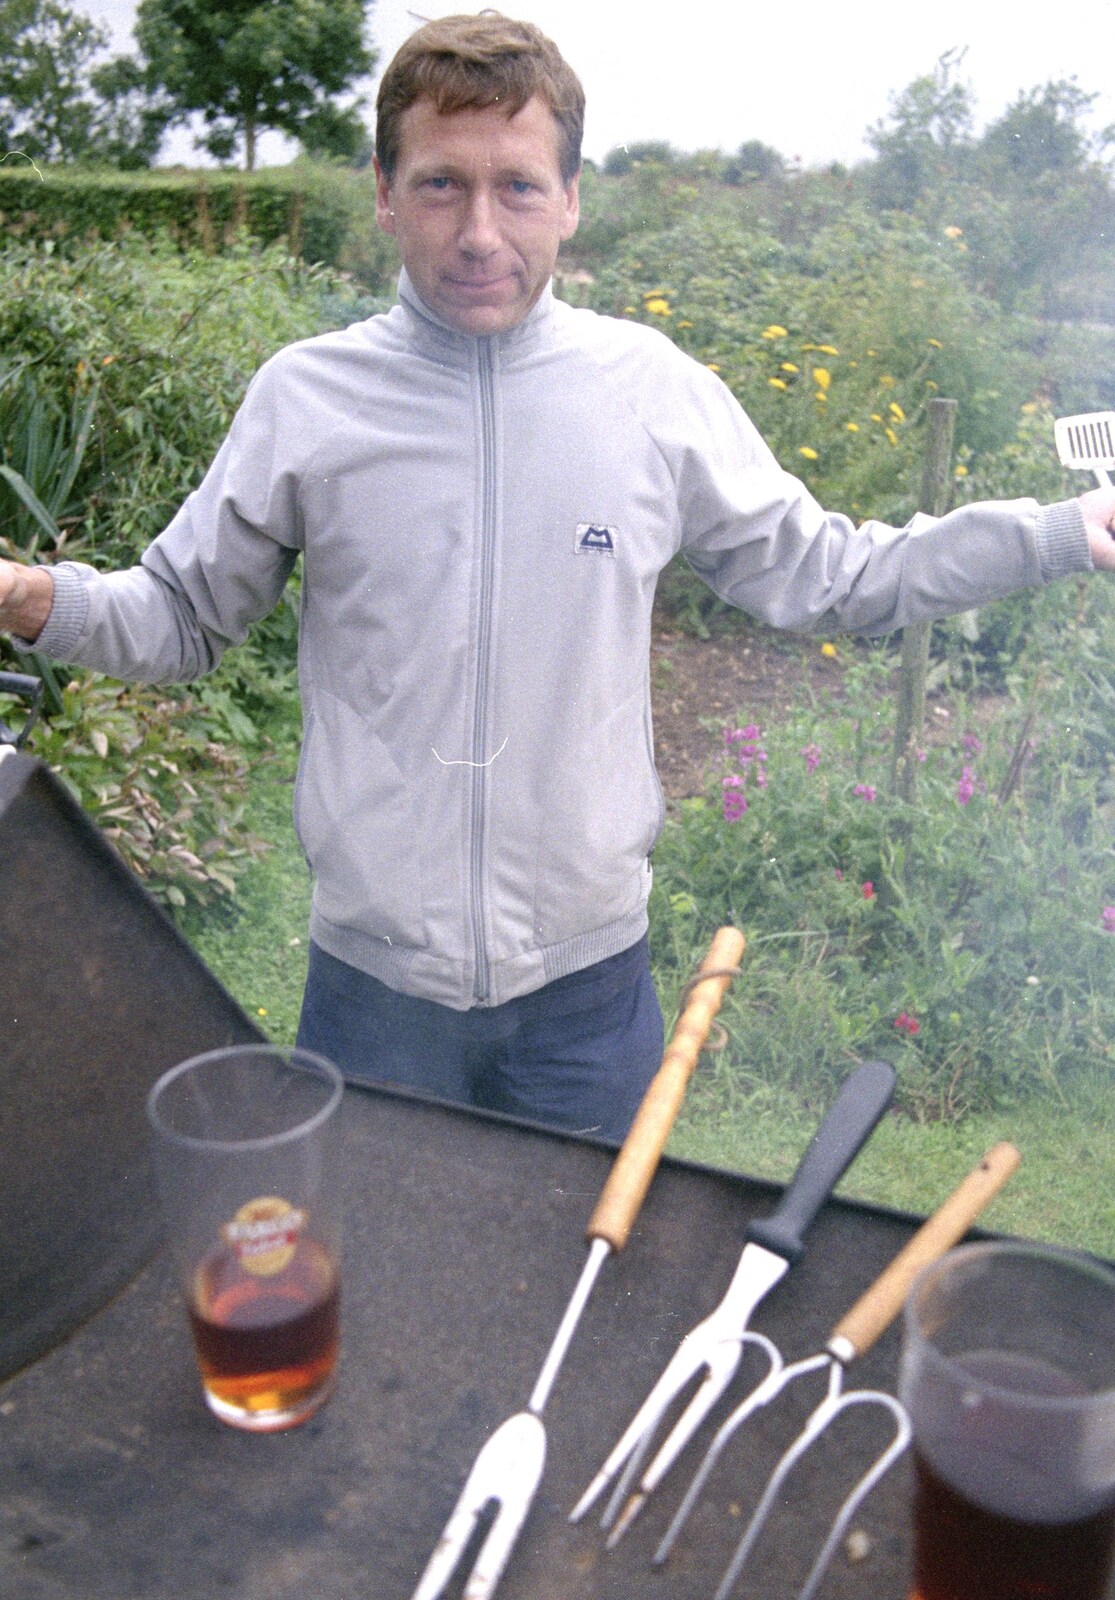 Apple John from A Mortlock Barbeque and a CISU Party, Suffolk - 11th July 1999